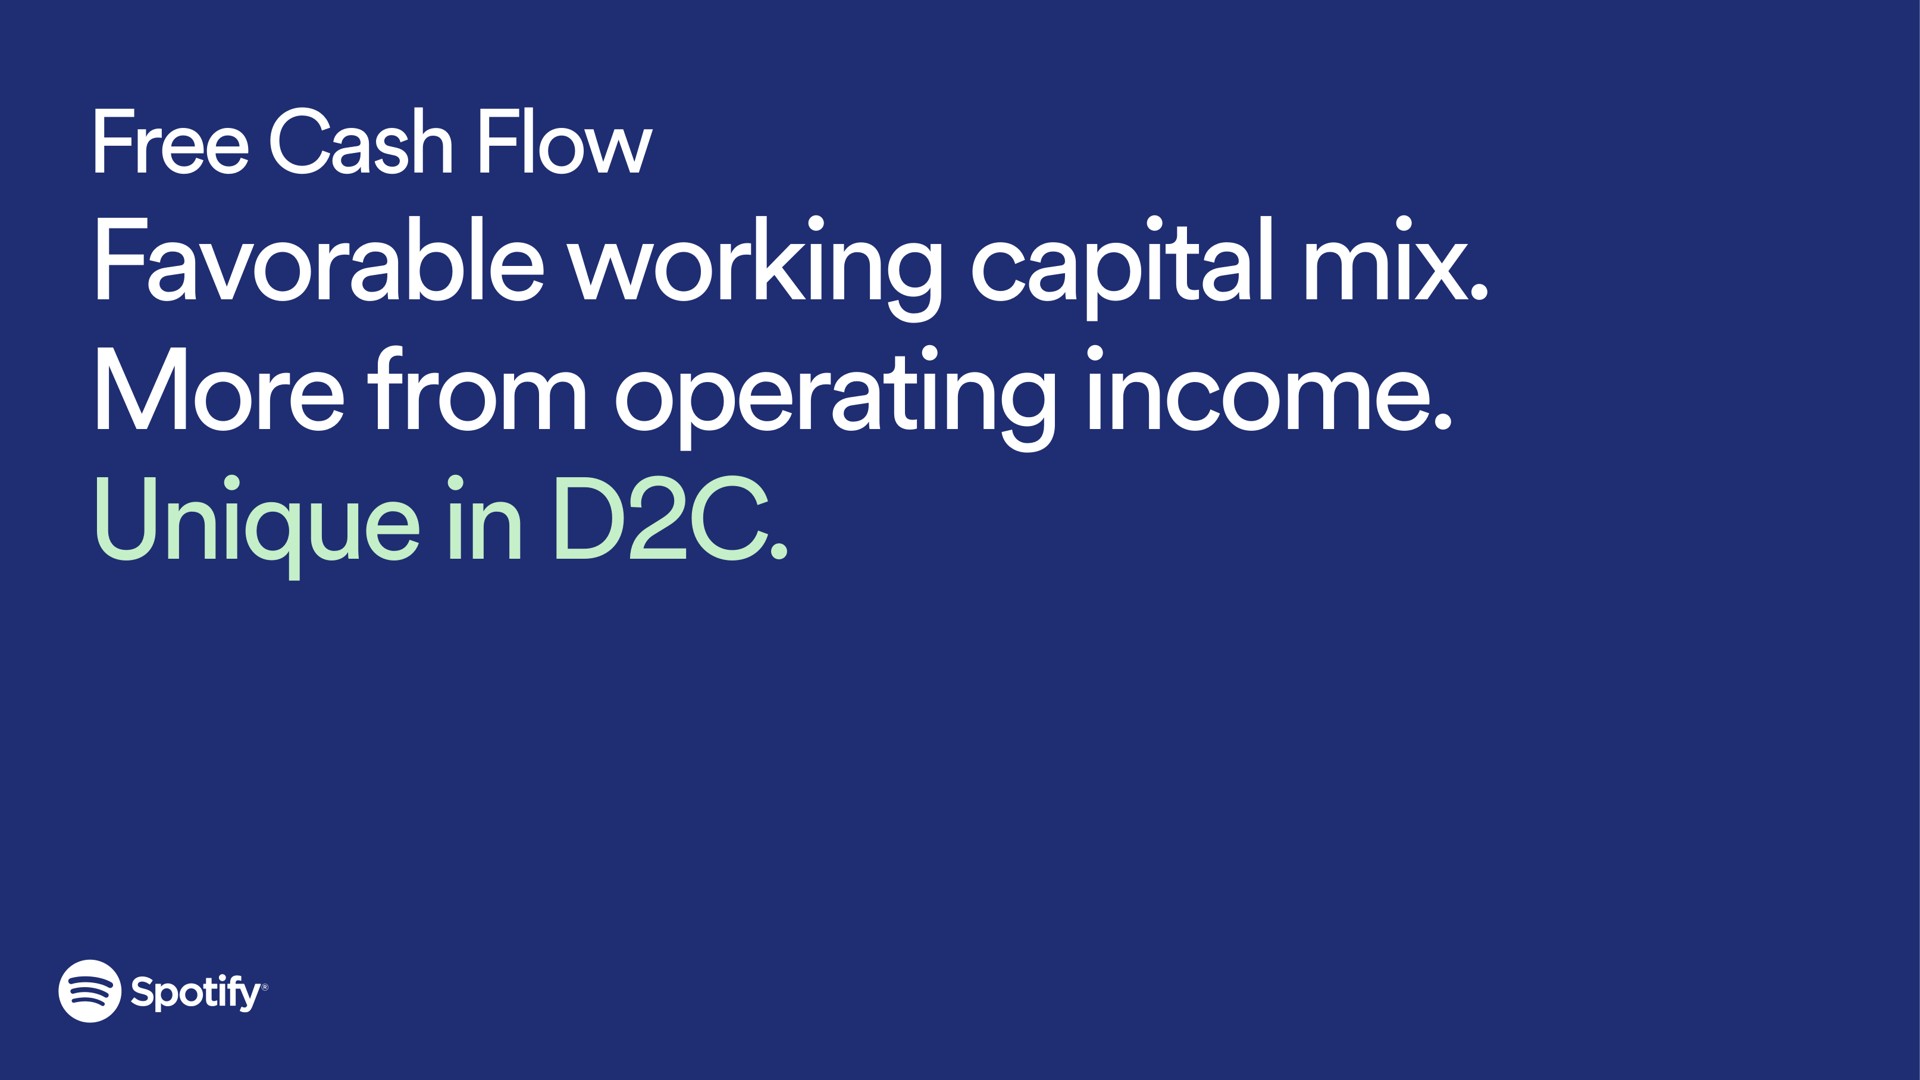 free cash flow favorable working capital mix more from operating income unique in | Spotify